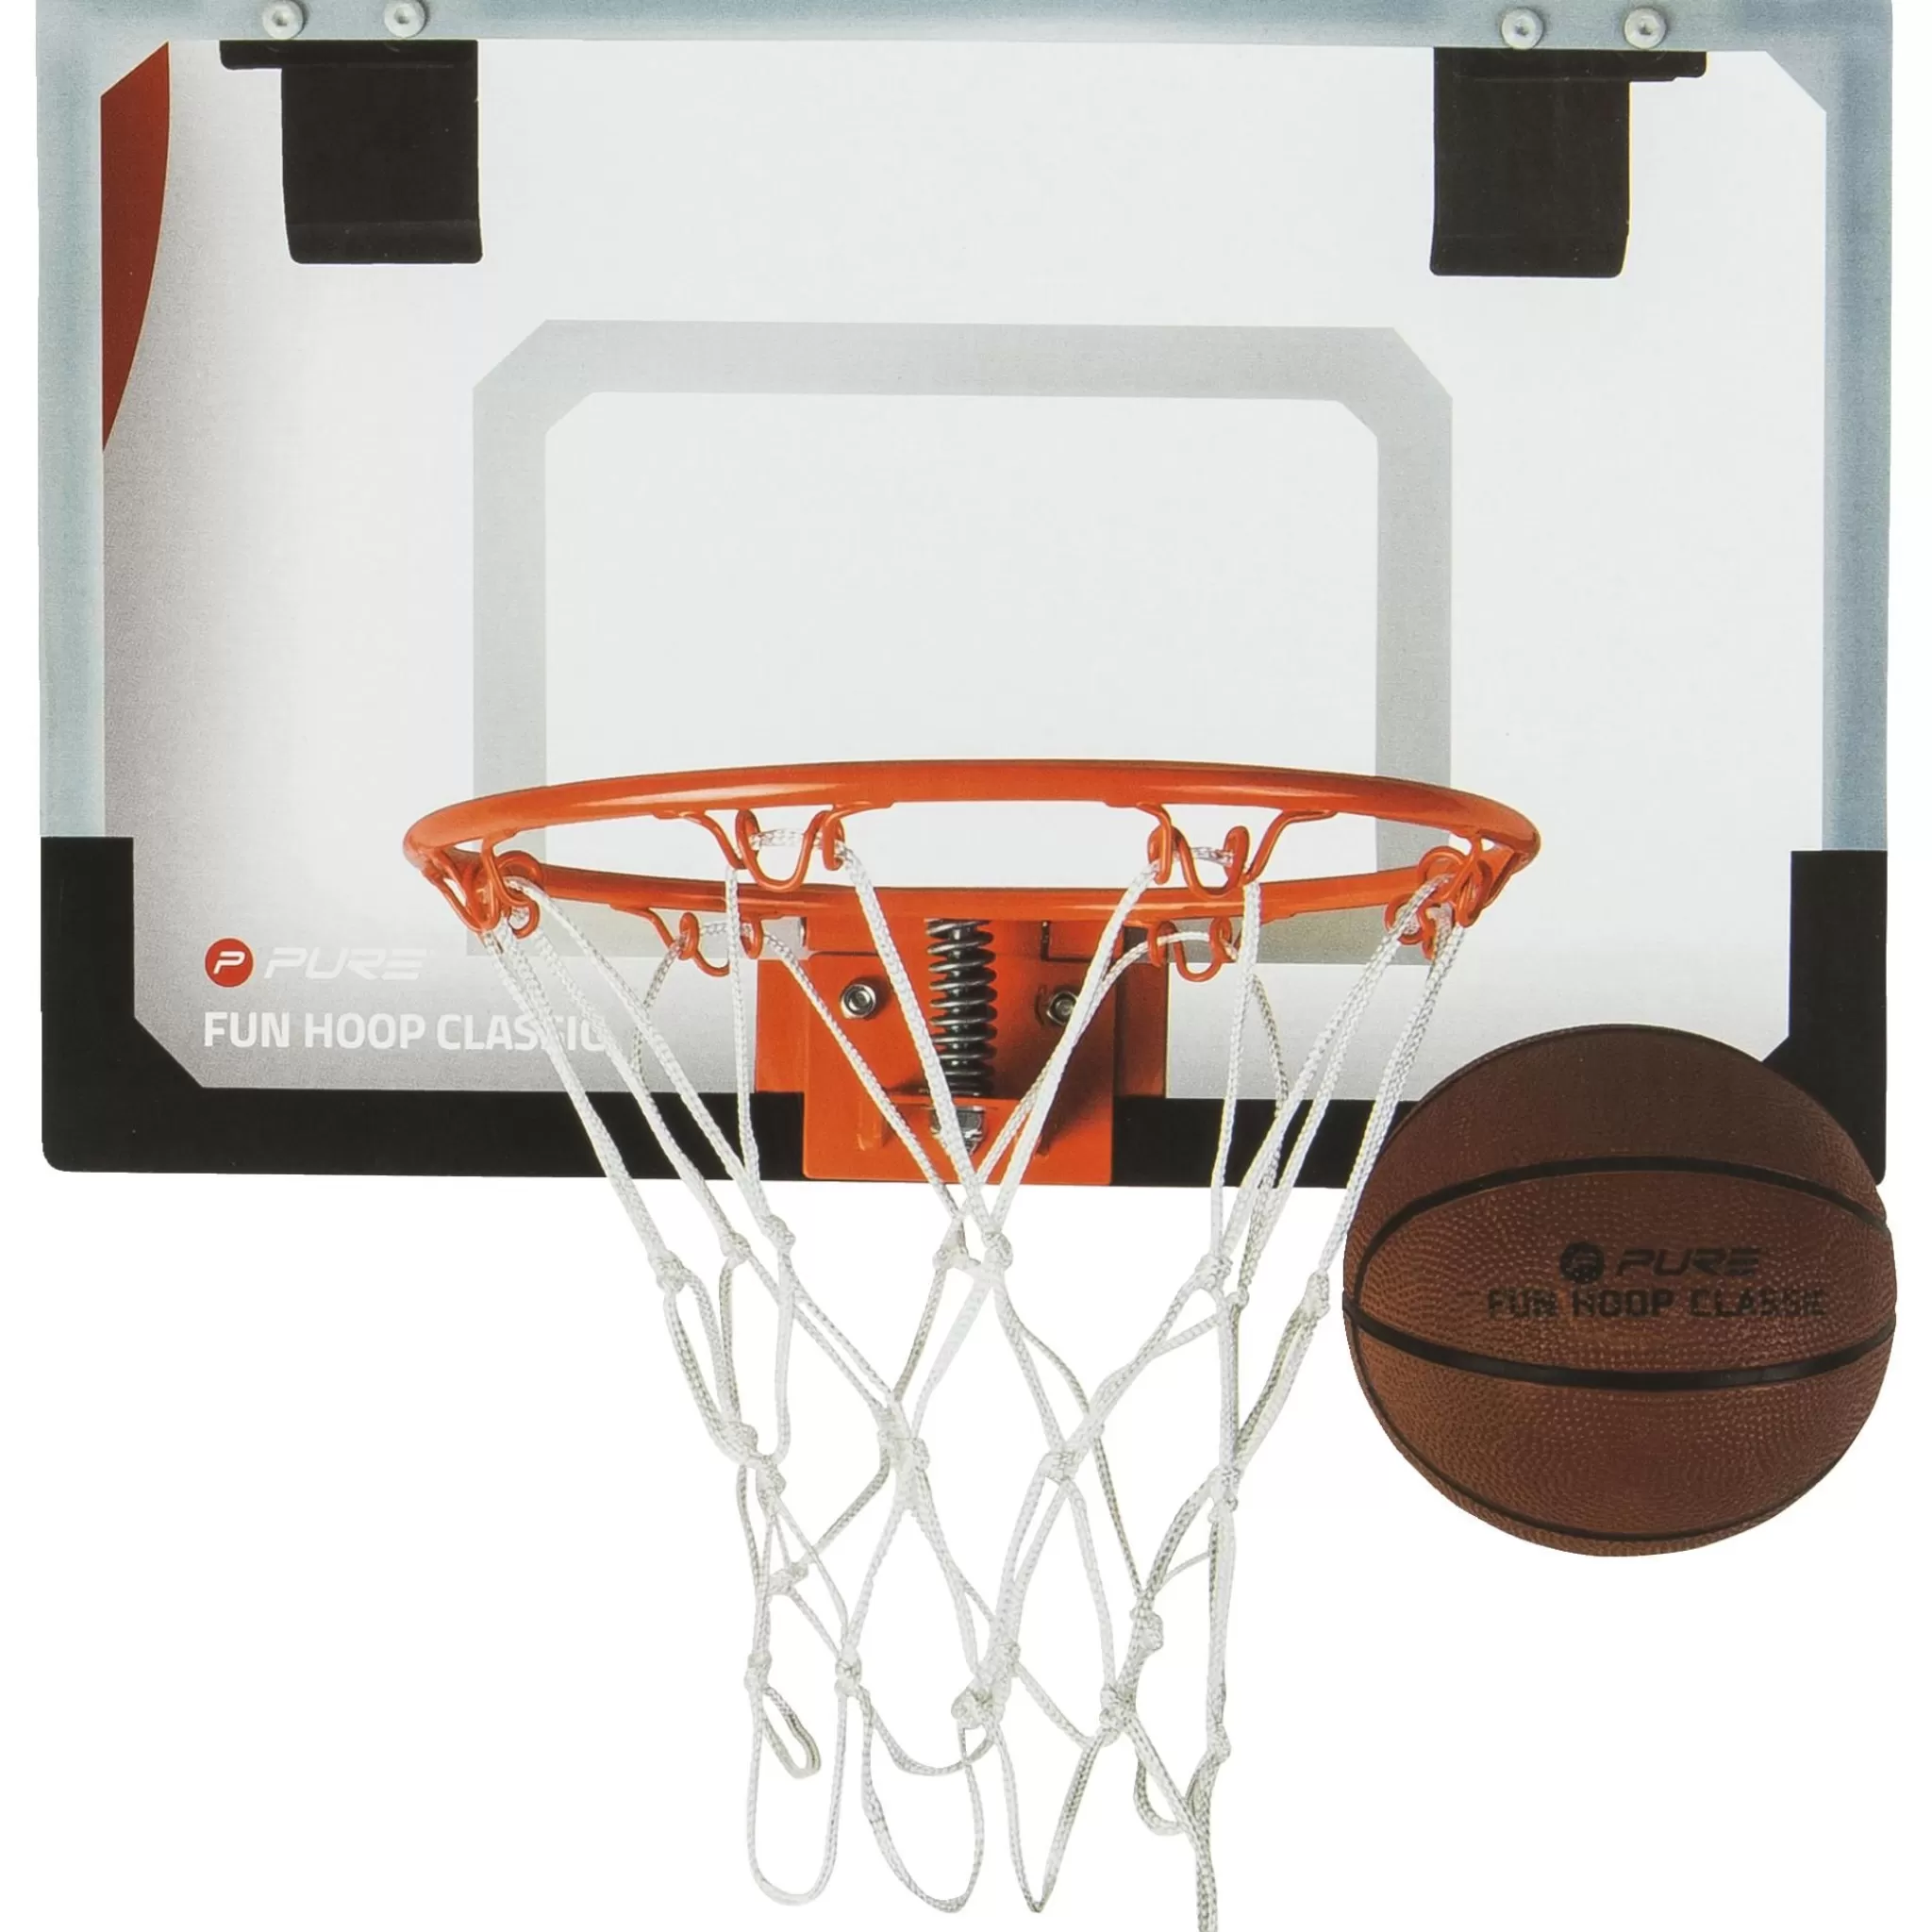 Outlet Pure2Improve Fun Hoop Classic, Basketkorg